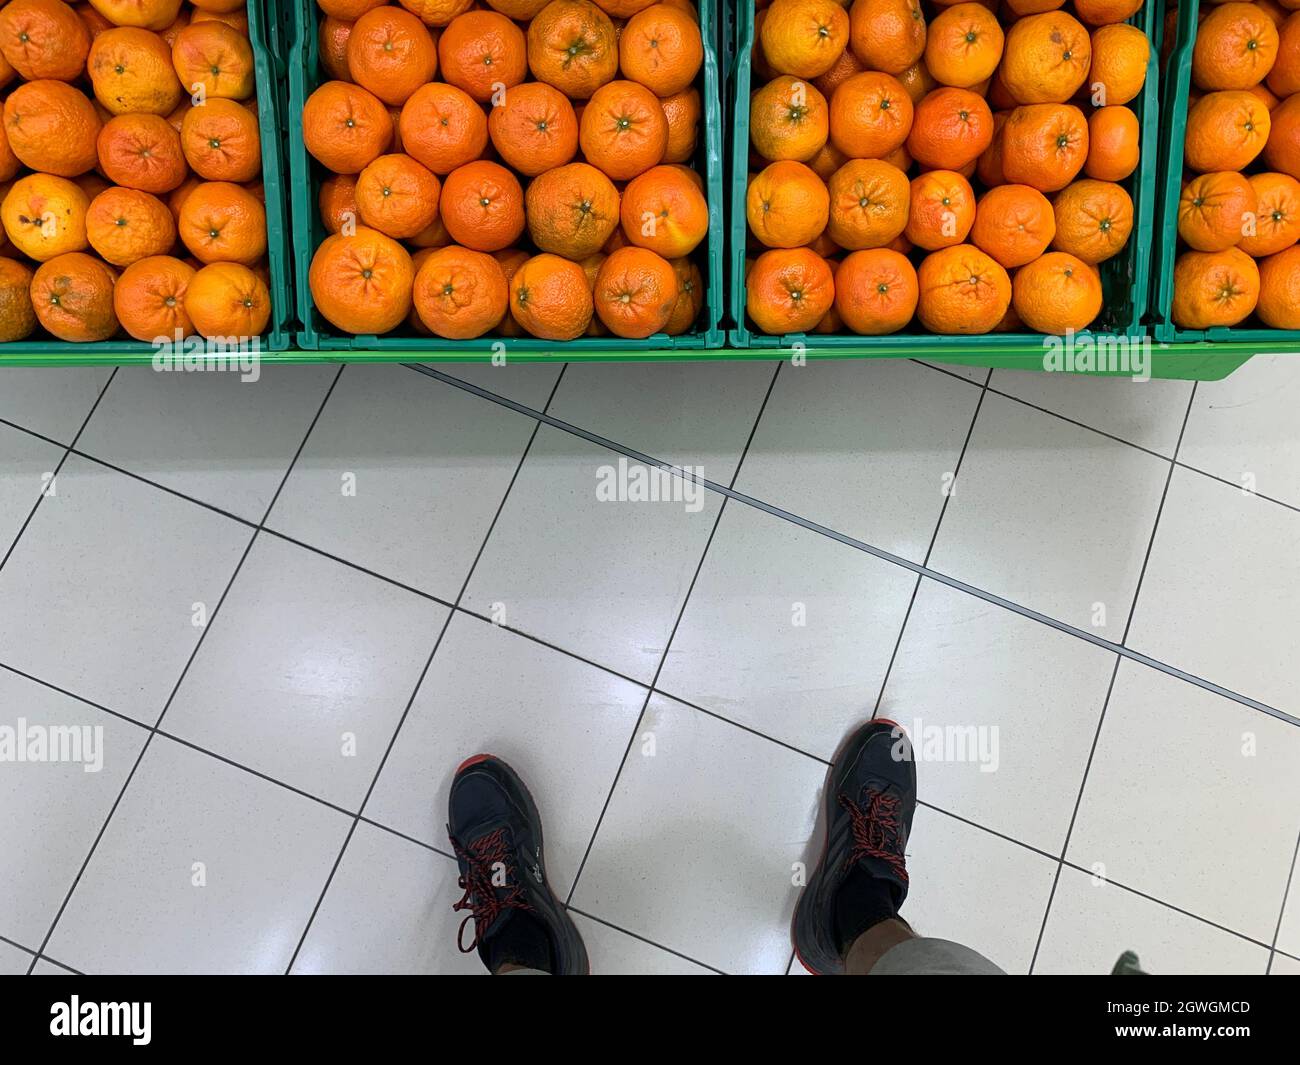 Low Section Of Person Standing In Front Of Oranges For Sale At Market Stock Photo